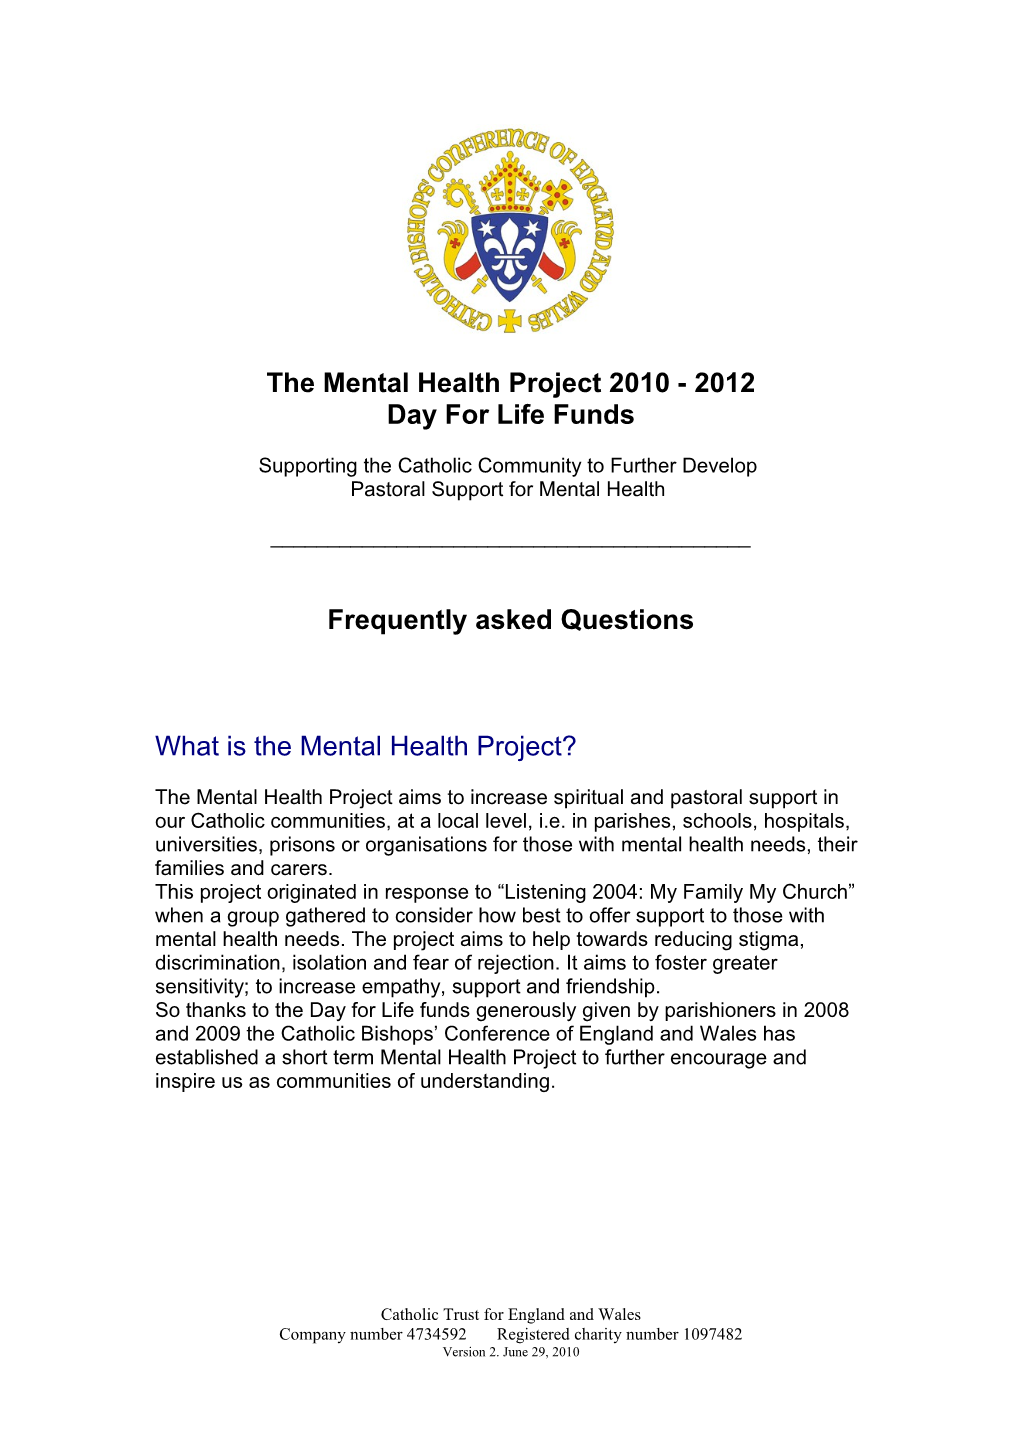 The Mental Health Project 2010 - 2012